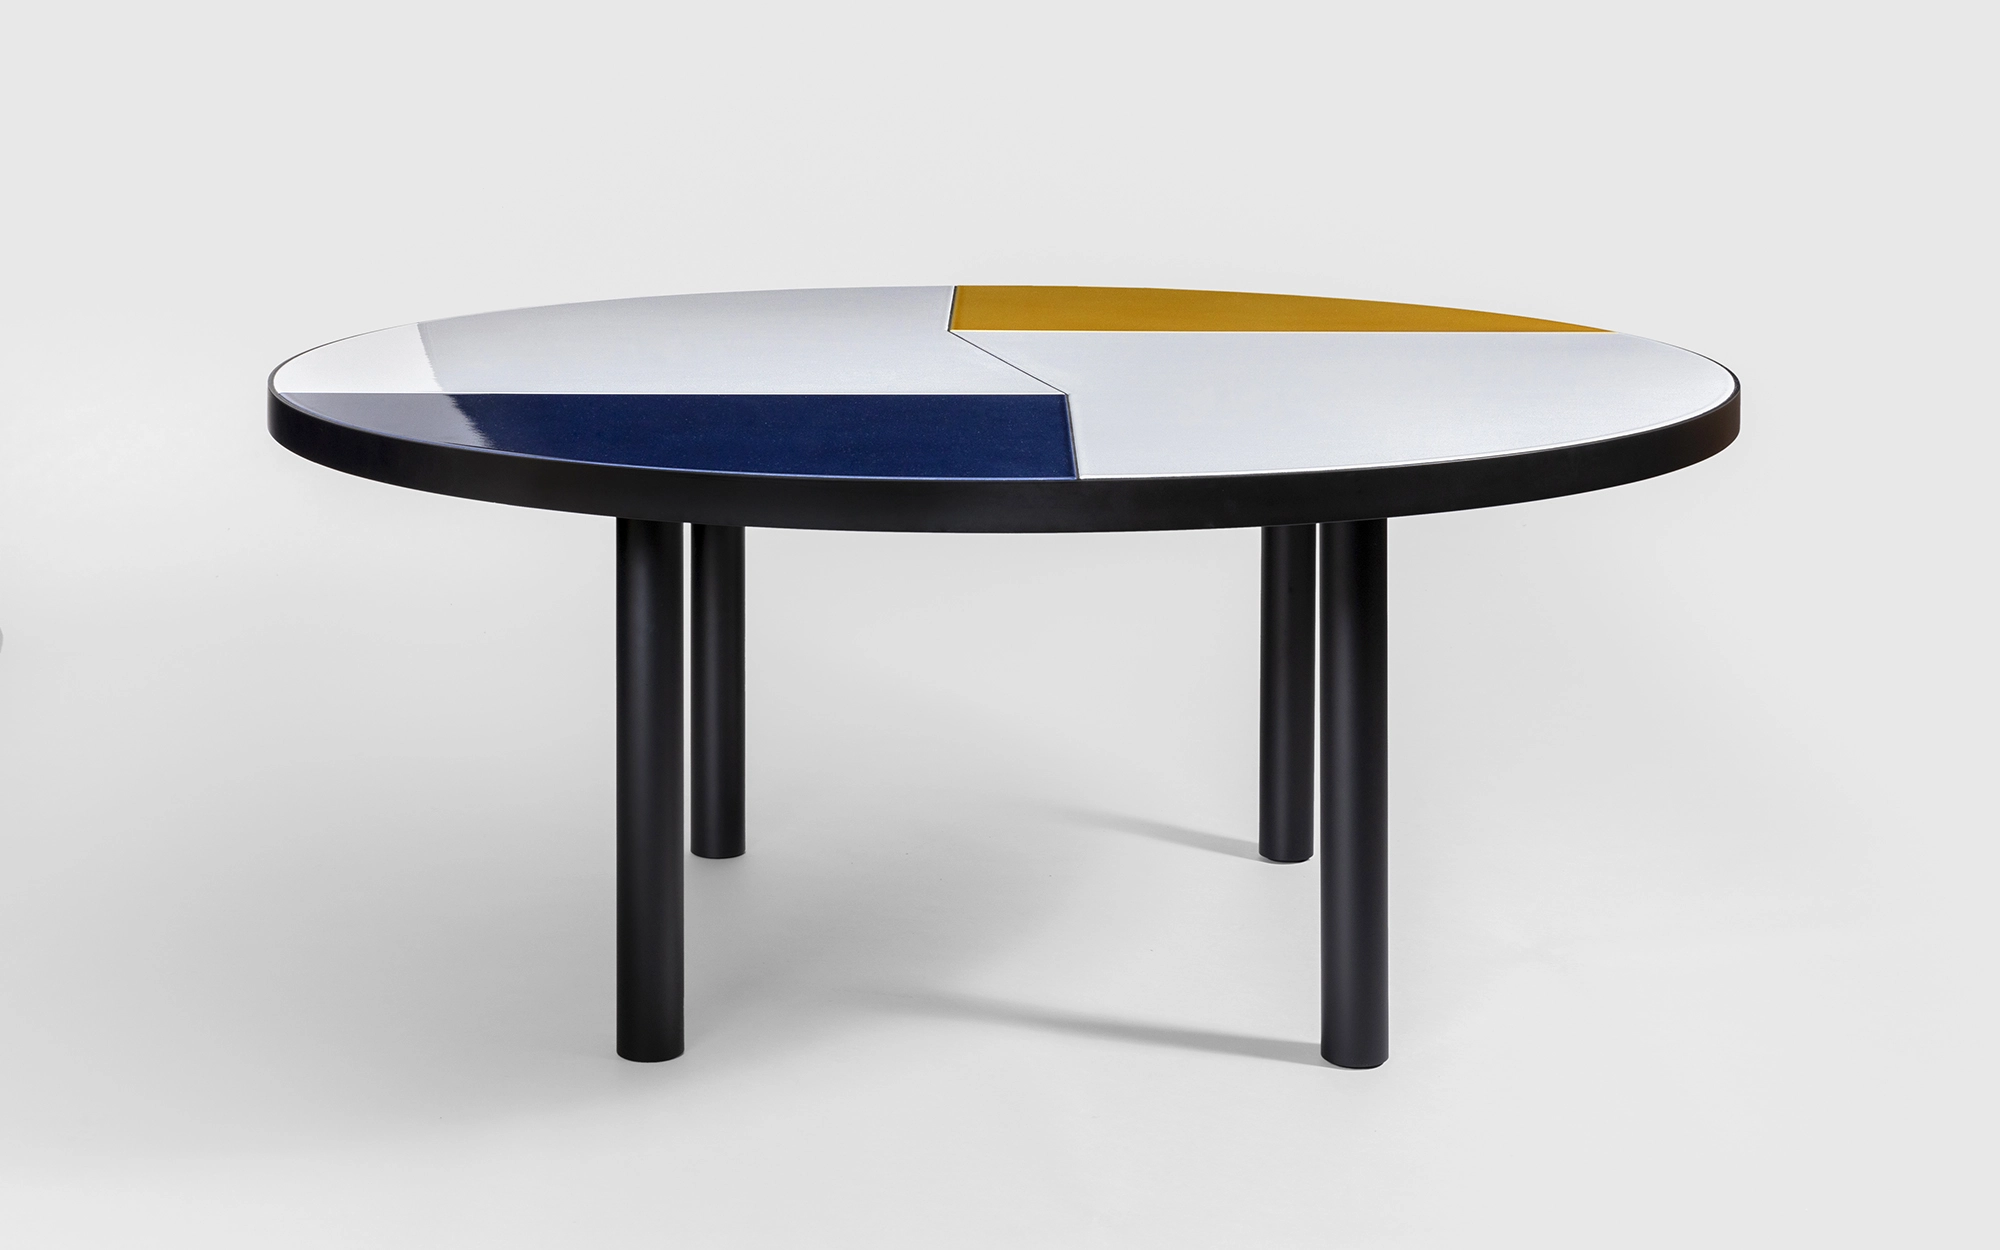 Fraction Dining Table - Pierre Charpin - Bench - Galerie kreo